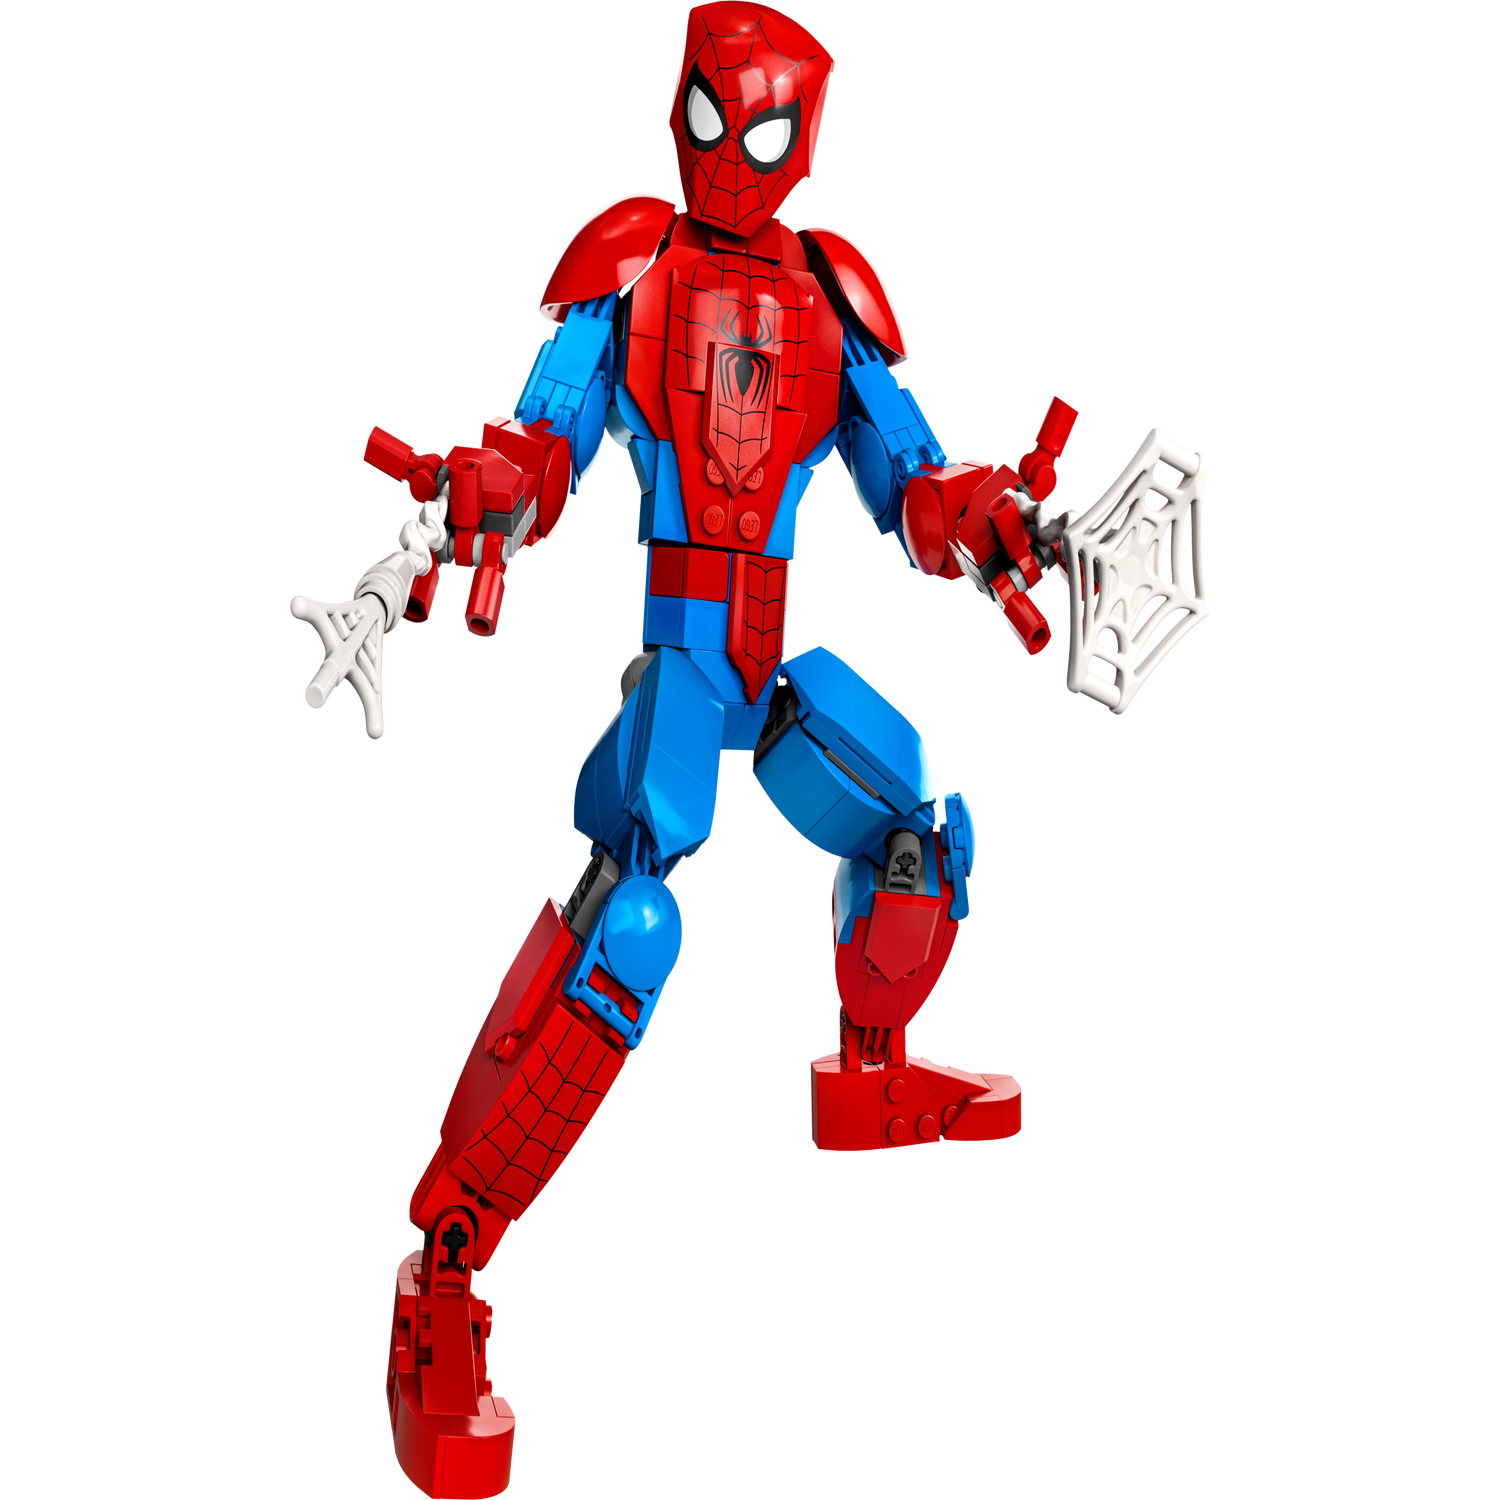 LEGO Super Heroes Spider-Man Figure 76226 by LEGO Systems Inc.